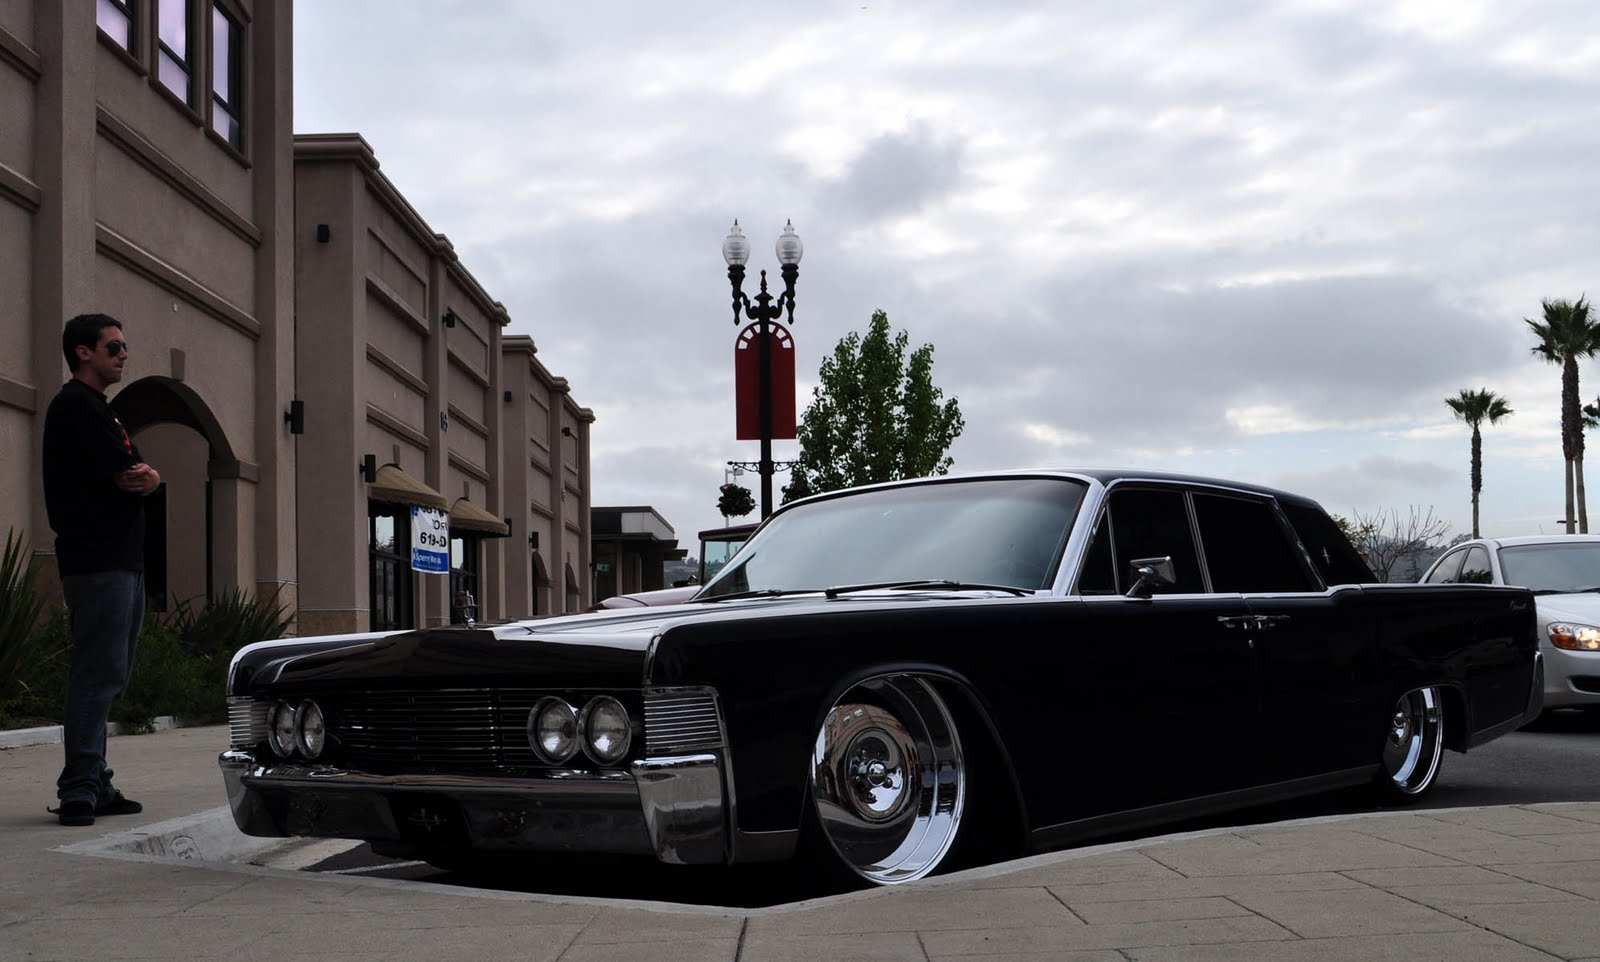  Lowrider HD Wallpapers Backgrounds